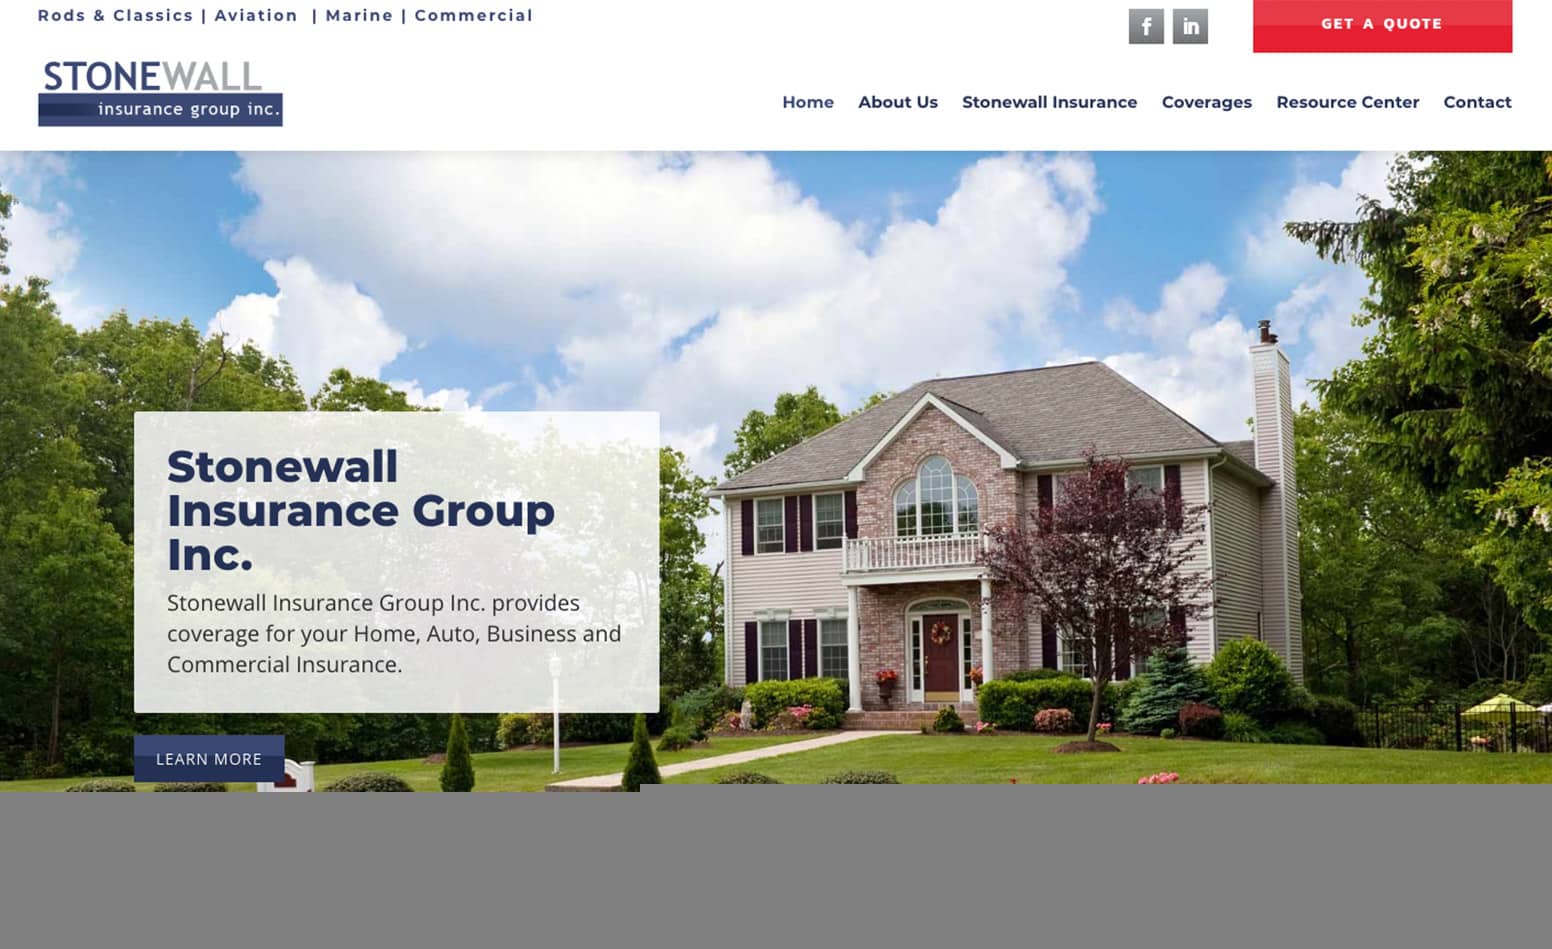 Stonewall Insurance Group website, digital marketing agency MA, advertising agency CT, Envision Marketing Group, graphic design MA